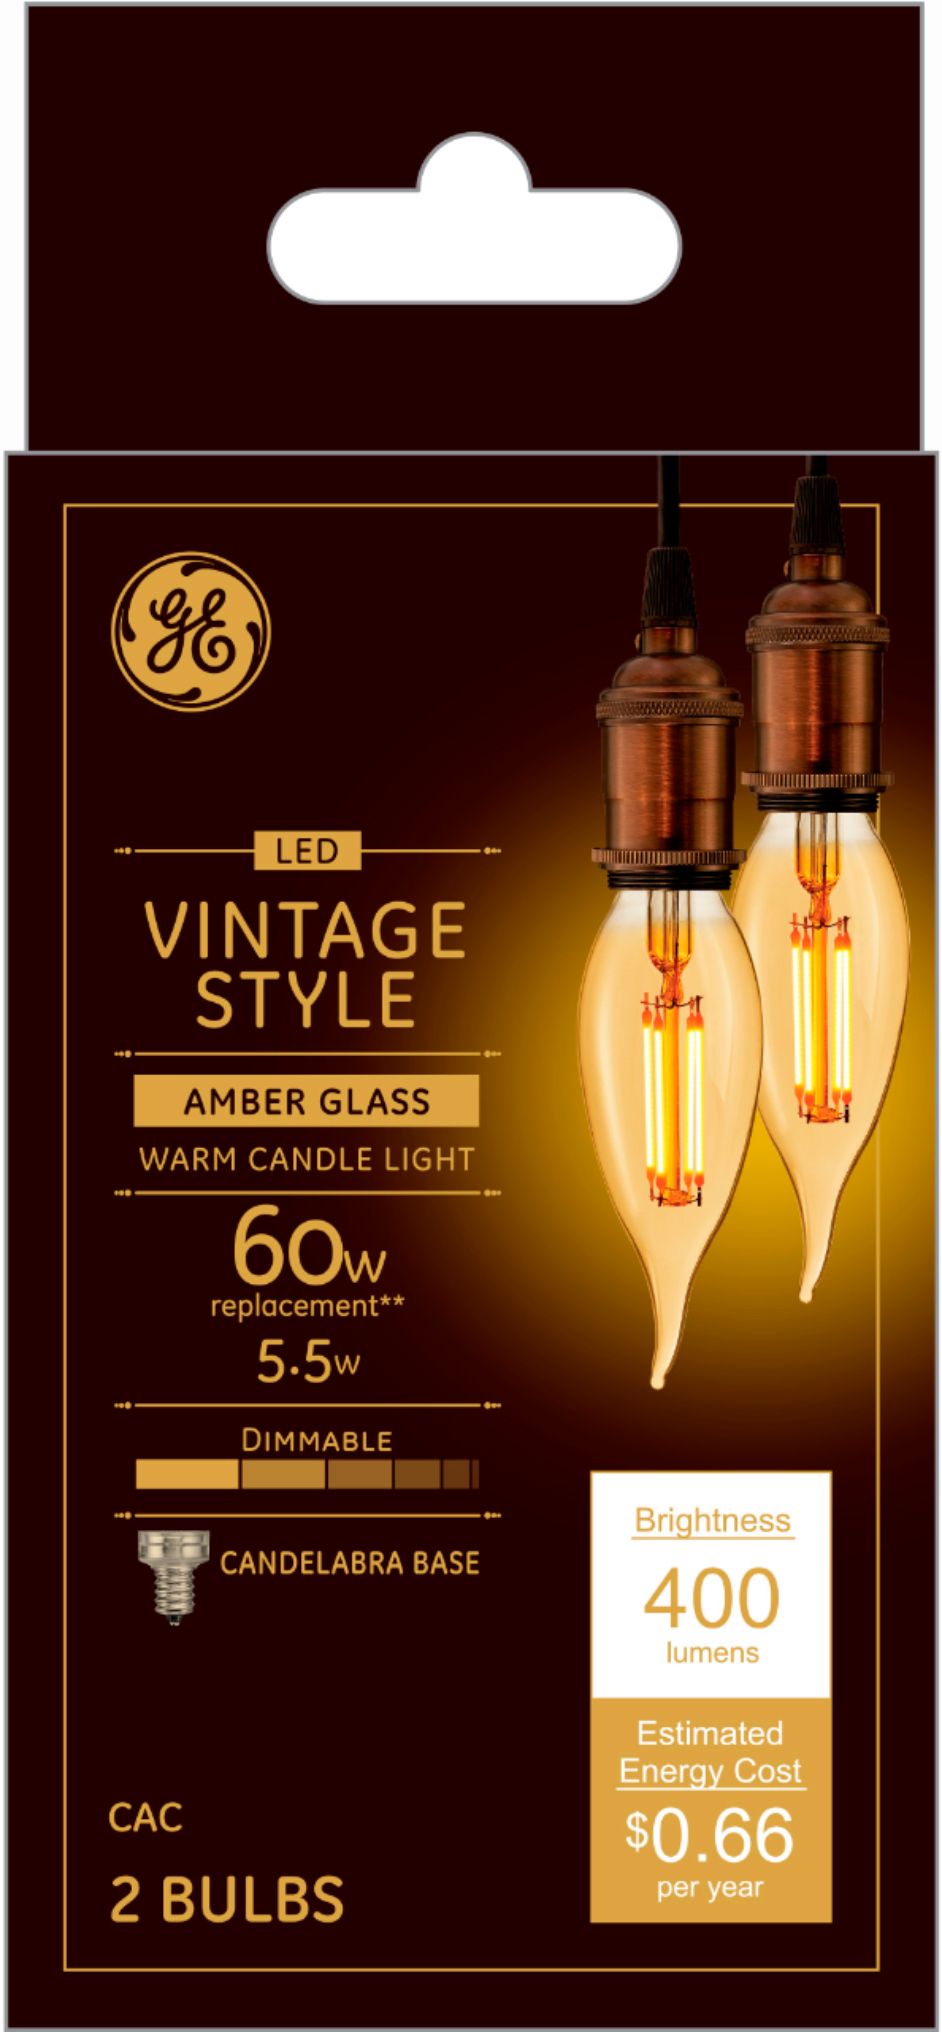 GE - Vintage 400-Lumen, 5.5W Dimmable candle LED Light Bulb, 60W Equivalent (2-Pack) - Amber